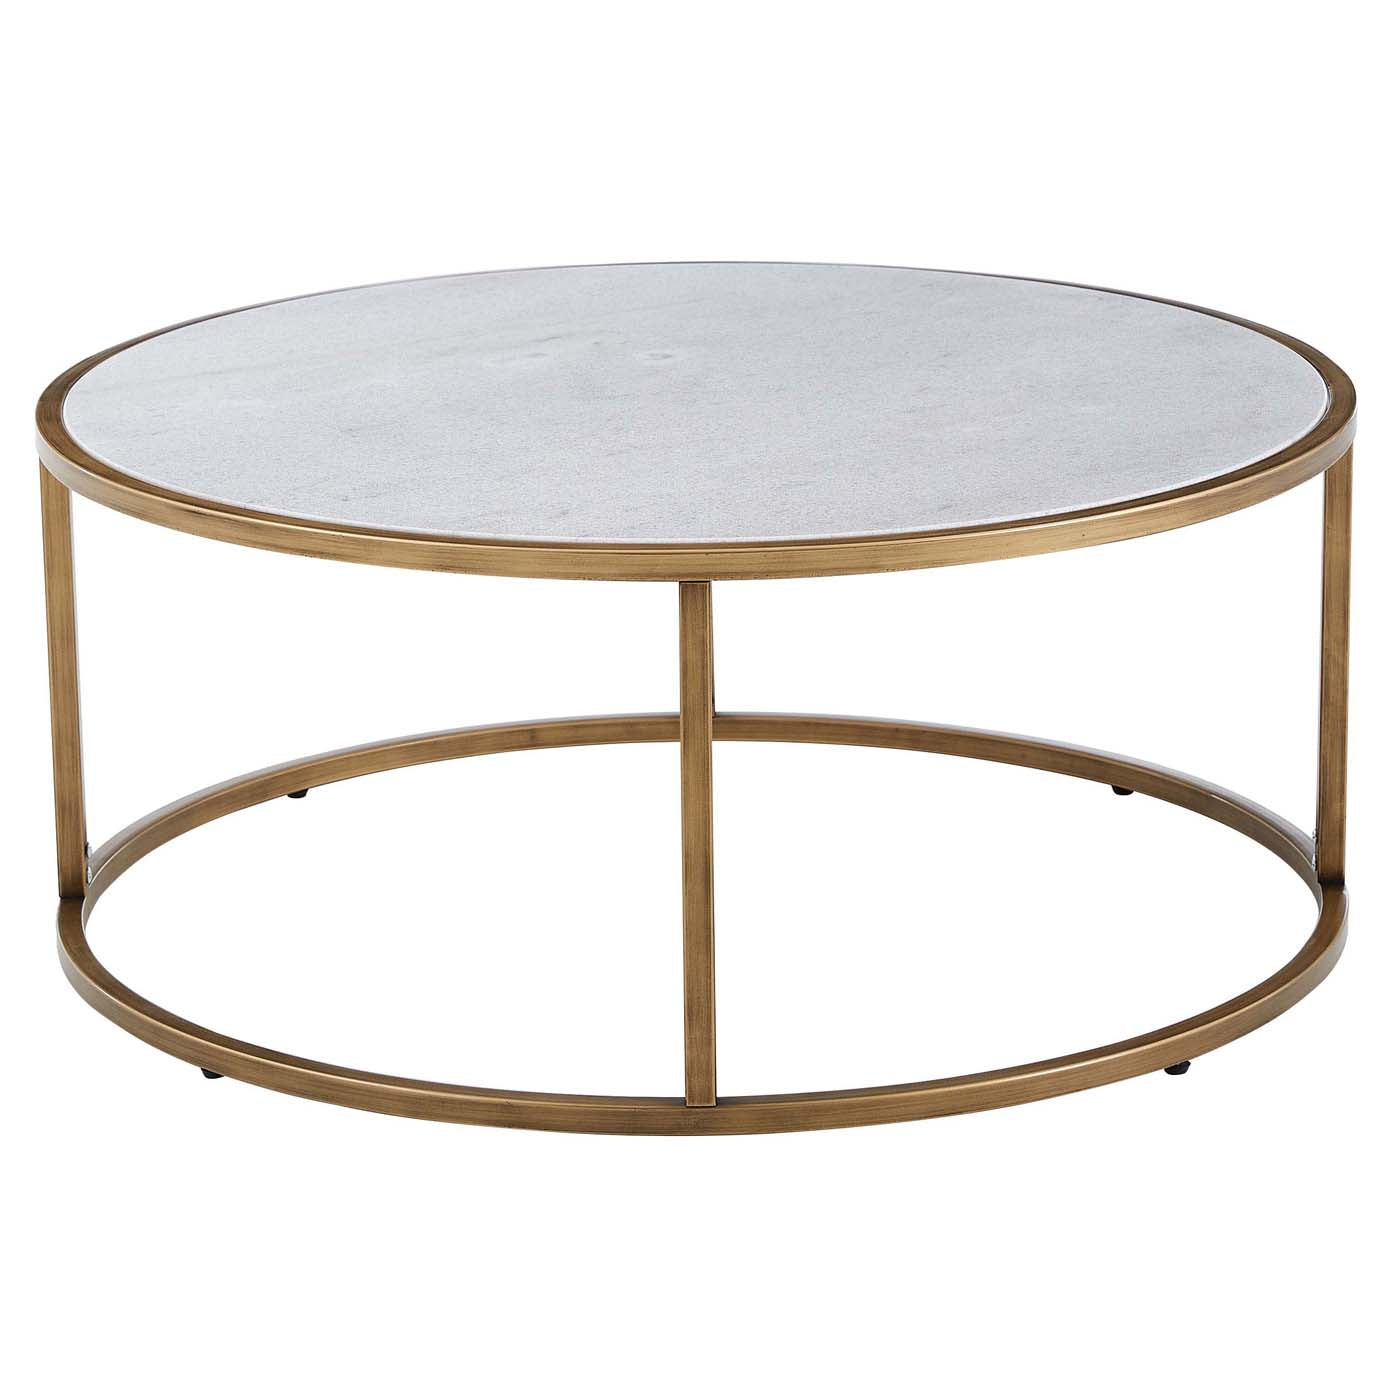 Safavieh Couture Brynna Round Marble Coffee Table